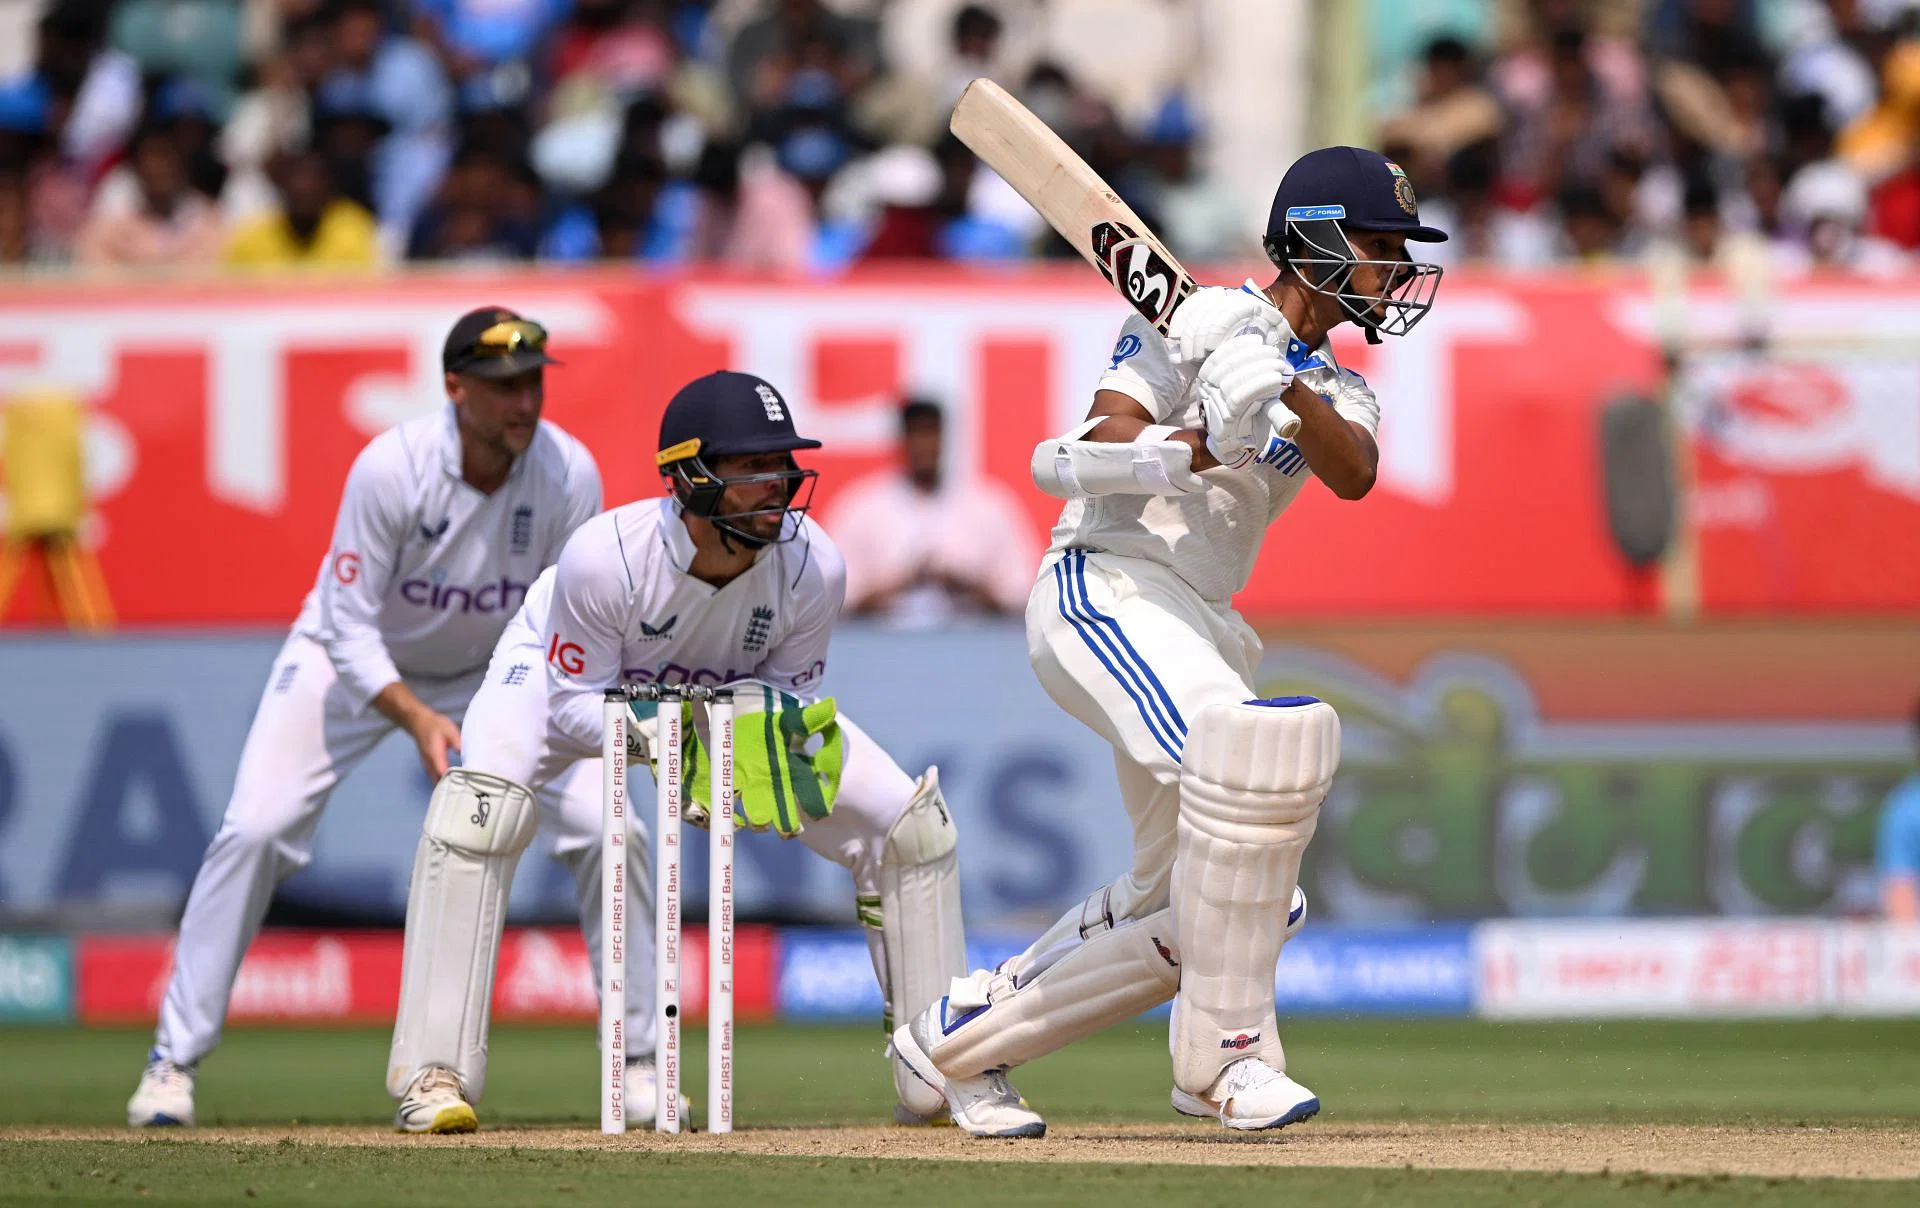 ICC Test Batter Rankings: Yashasvi Jaiswal And Joe Root Move Up After The 4th Test Between IND vd ENG